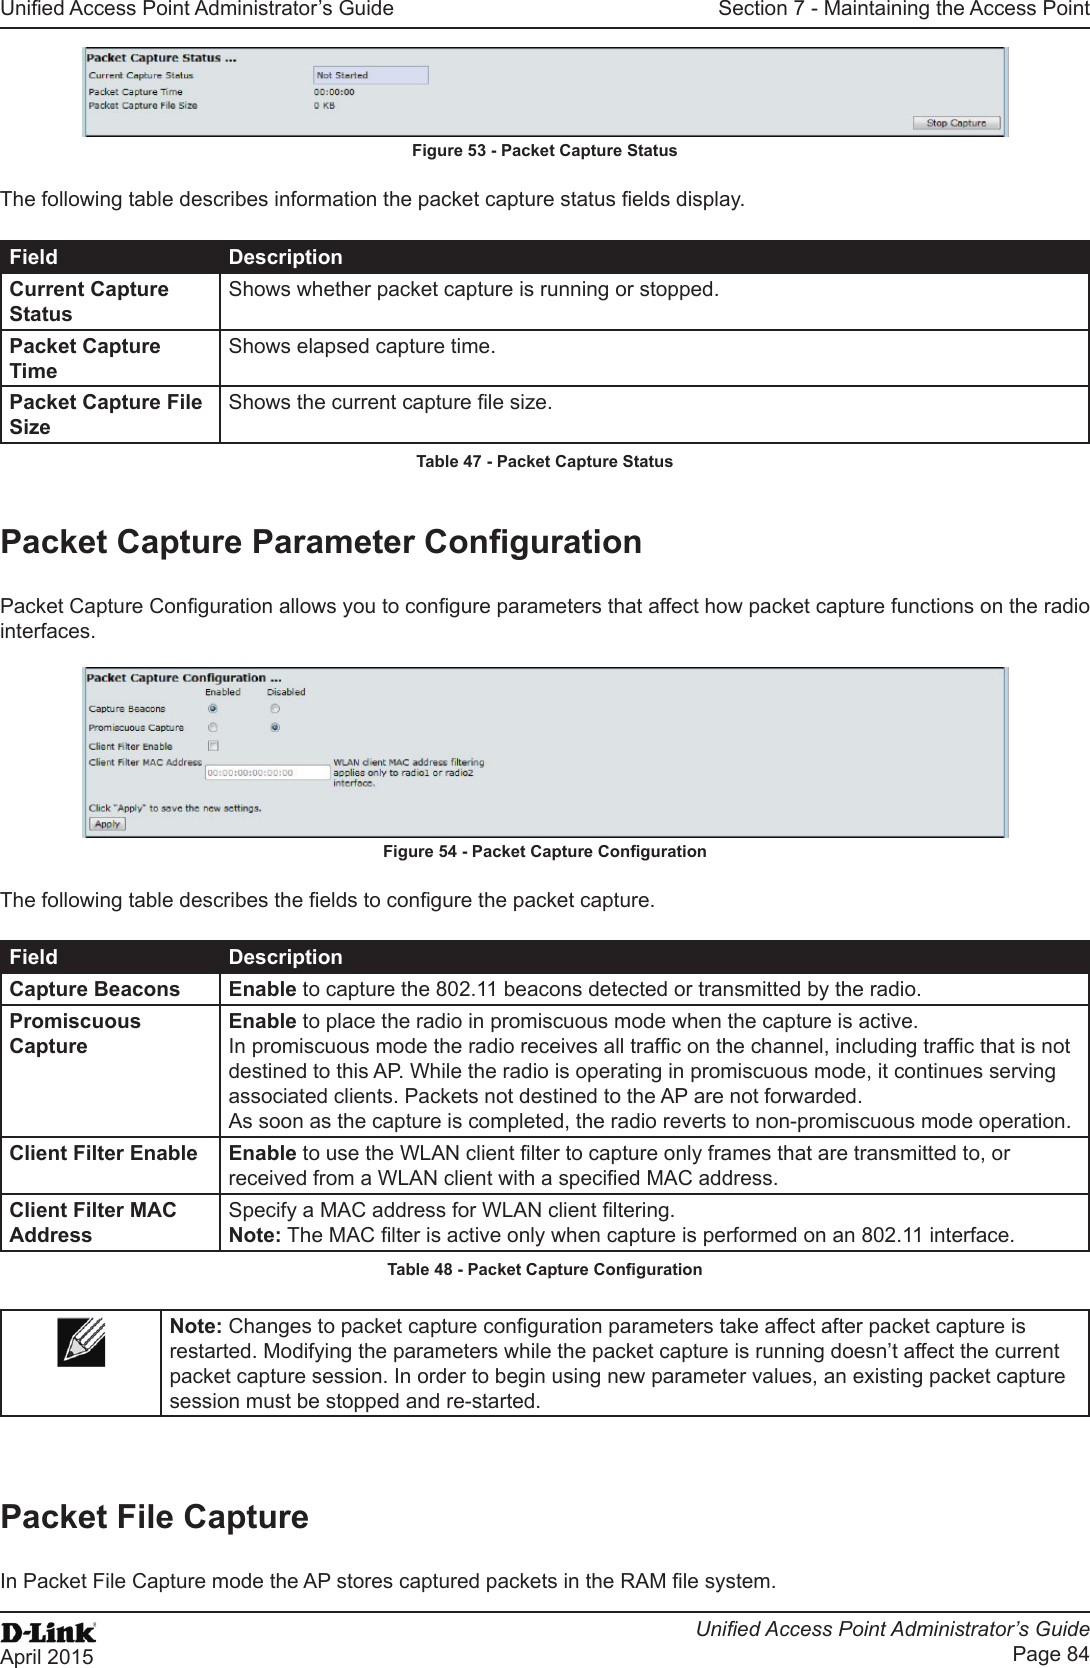 Unied Access Point Administrator’s GuideUnied Access Point Administrator’s GuidePage 84April 2015Section 7 - Maintaining the Access PointFigure 53 - Packet Capture StatusThe following table describes information the packet capture status elds display.Field DescriptionCurrent Capture StatusShows whether packet capture is running or stopped.Packet Capture TimeShows elapsed capture time.Packet Capture File SizeShows the current capture le size.Table 47 - Packet Capture StatusPacket Capture Parameter CongurationPacket Capture Conguration allows you to congure parameters that affect how packet capture functions on the radio interfaces.Figure 54 - Packet Capture CongurationThe following table describes the elds to congure the packet capture.Field DescriptionCapture Beacons Enable to capture the 802.11 beacons detected or transmitted by the radio.Promiscuous CaptureEnable to place the radio in promiscuous mode when the capture is active. In promiscuous mode the radio receives all trafc on the channel, including trafc that is not destined to this AP. While the radio is operating in promiscuous mode, it continues serving associated clients. Packets not destined to the AP are not forwarded. As soon as the capture is completed, the radio reverts to non-promiscuous mode operation.Client Filter Enable Enable to use the WLAN client lter to capture only frames that are transmitted to, or received from a WLAN client with a specied MAC address.Client Filter MAC AddressSpecify a MAC address for WLAN client ltering.Note: The MAC lter is active only when capture is performed on an 802.11 interface.Table 48 - Packet Capture CongurationNote: Changes to packet capture conguration parameters take affect after packet capture is restarted. Modifying the parameters while the packet capture is running doesn’t affect the current packet capture session. In order to begin using new parameter values, an existing packet capture session must be stopped and re-started.Packet File CaptureIn Packet File Capture mode the AP stores captured packets in the RAM le system.